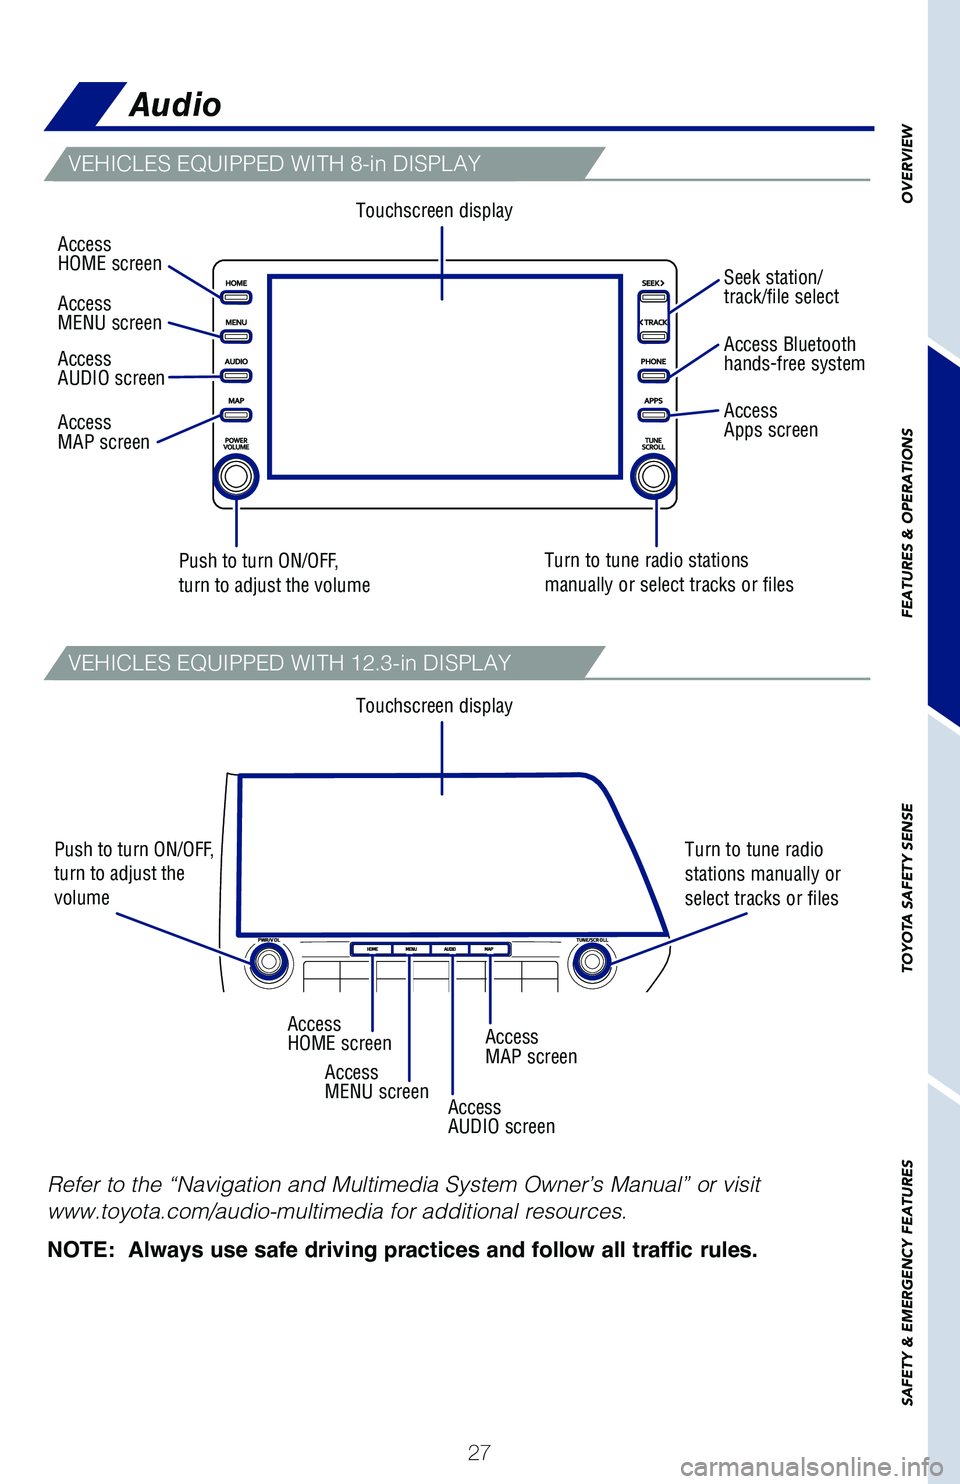 TOYOTA HIGHLANDER HYBRID 2021   (in English) Owners Manual 27
OVERVIEW
FEATURES & OPERATIONS
TOYOTA SAFETY SENSE
SAFETY & EMERGENCY FEATURES
“ ” 
Use to search within the 
selected audio feature.
Refer to the “Navigation and Multimedia System Owner’s 